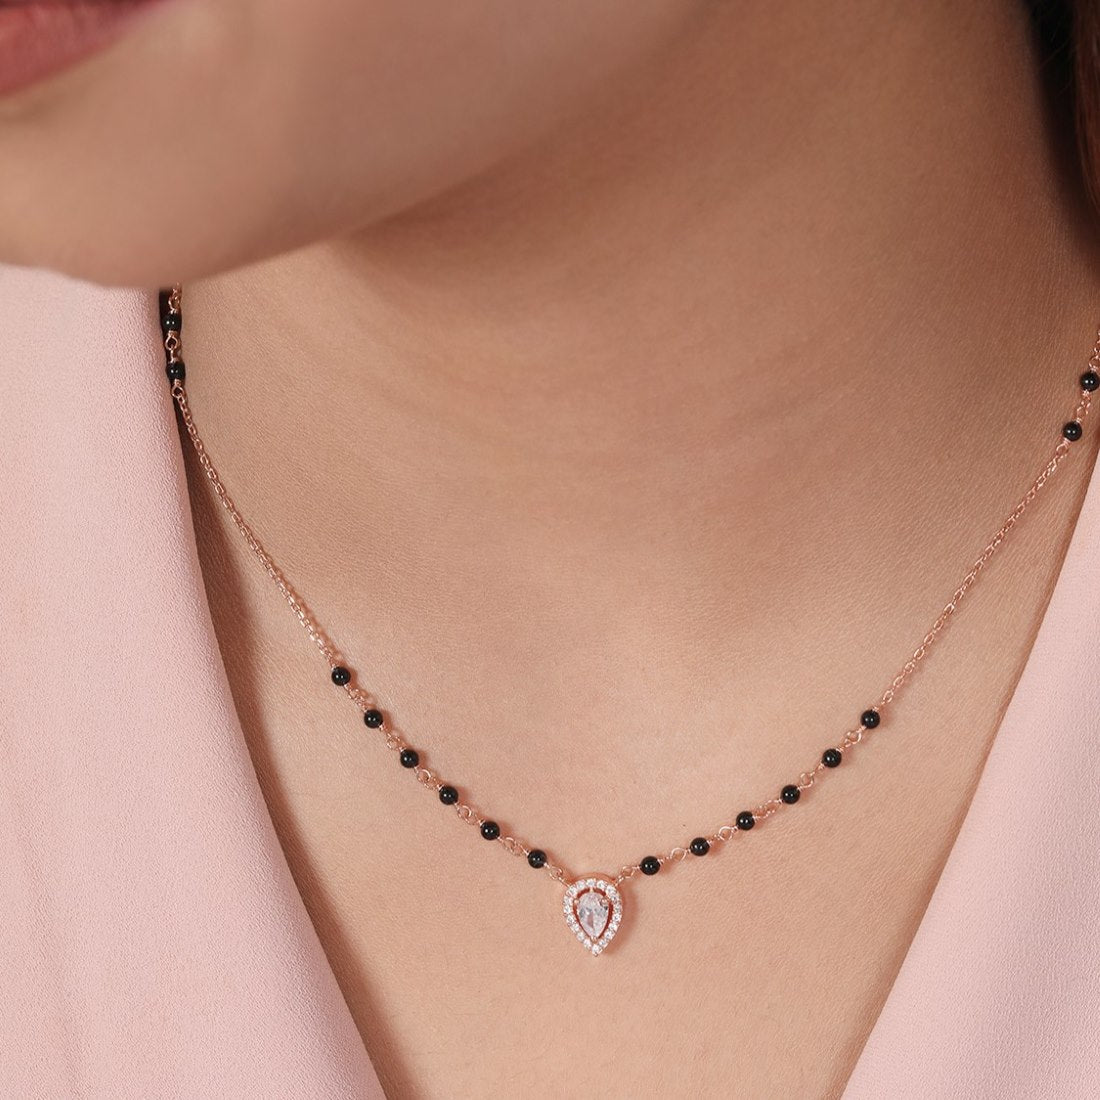 Teardrop Serenity Rose Gold-Plated 925 Sterling Silver Mangalsutra